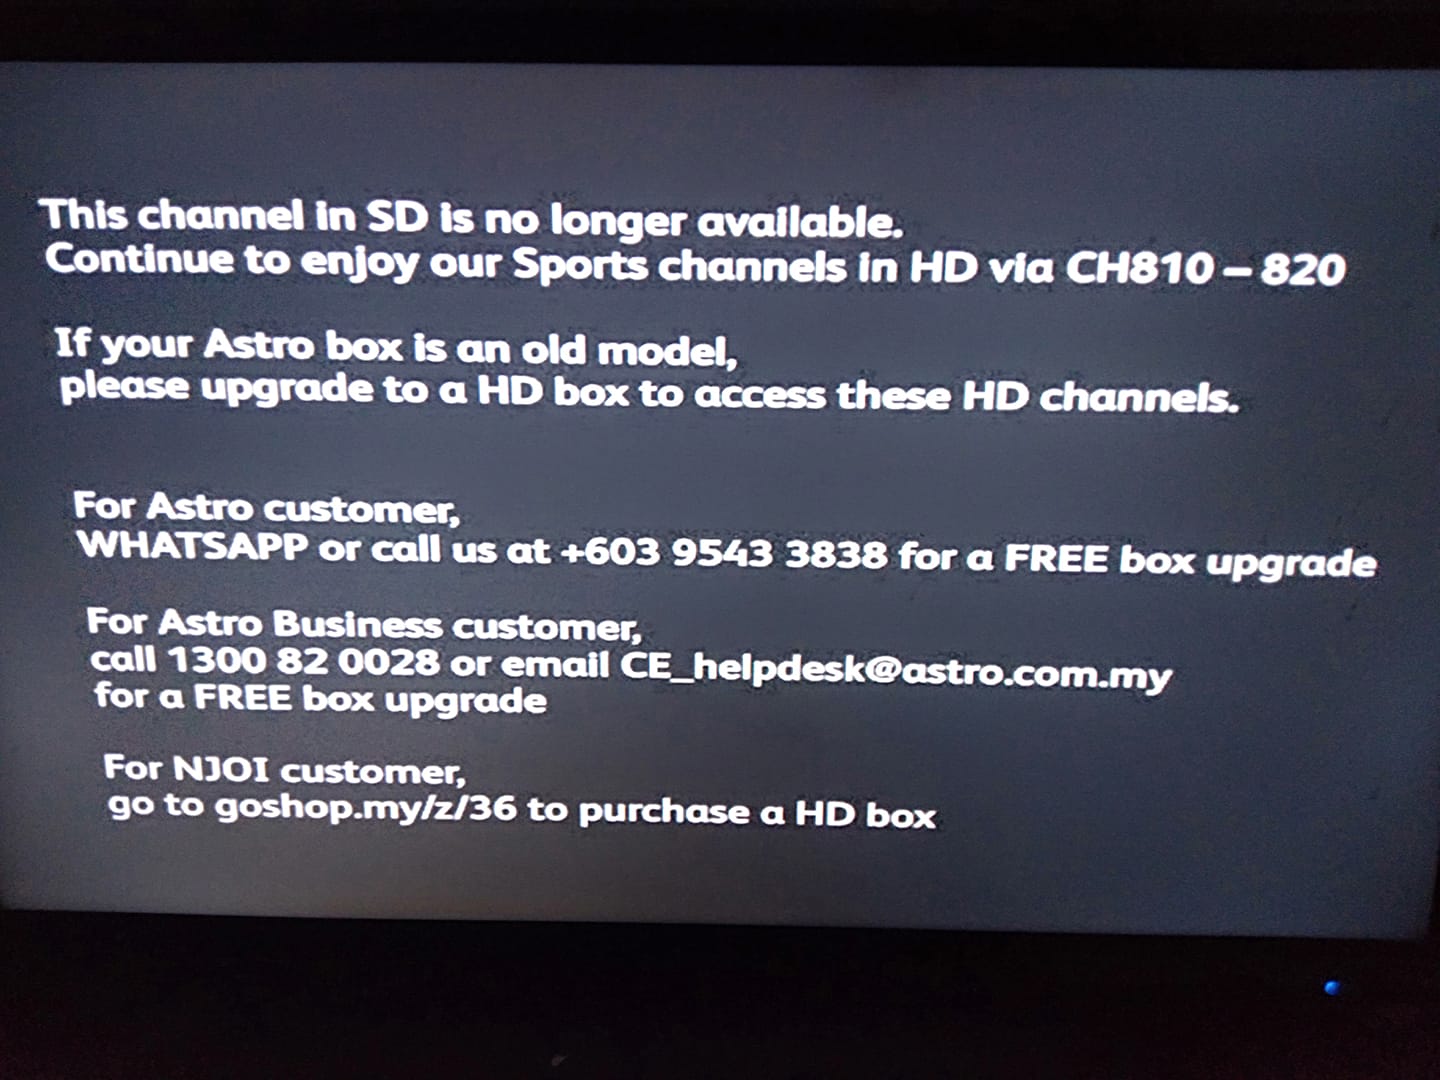 Astro SD sports channel ceases